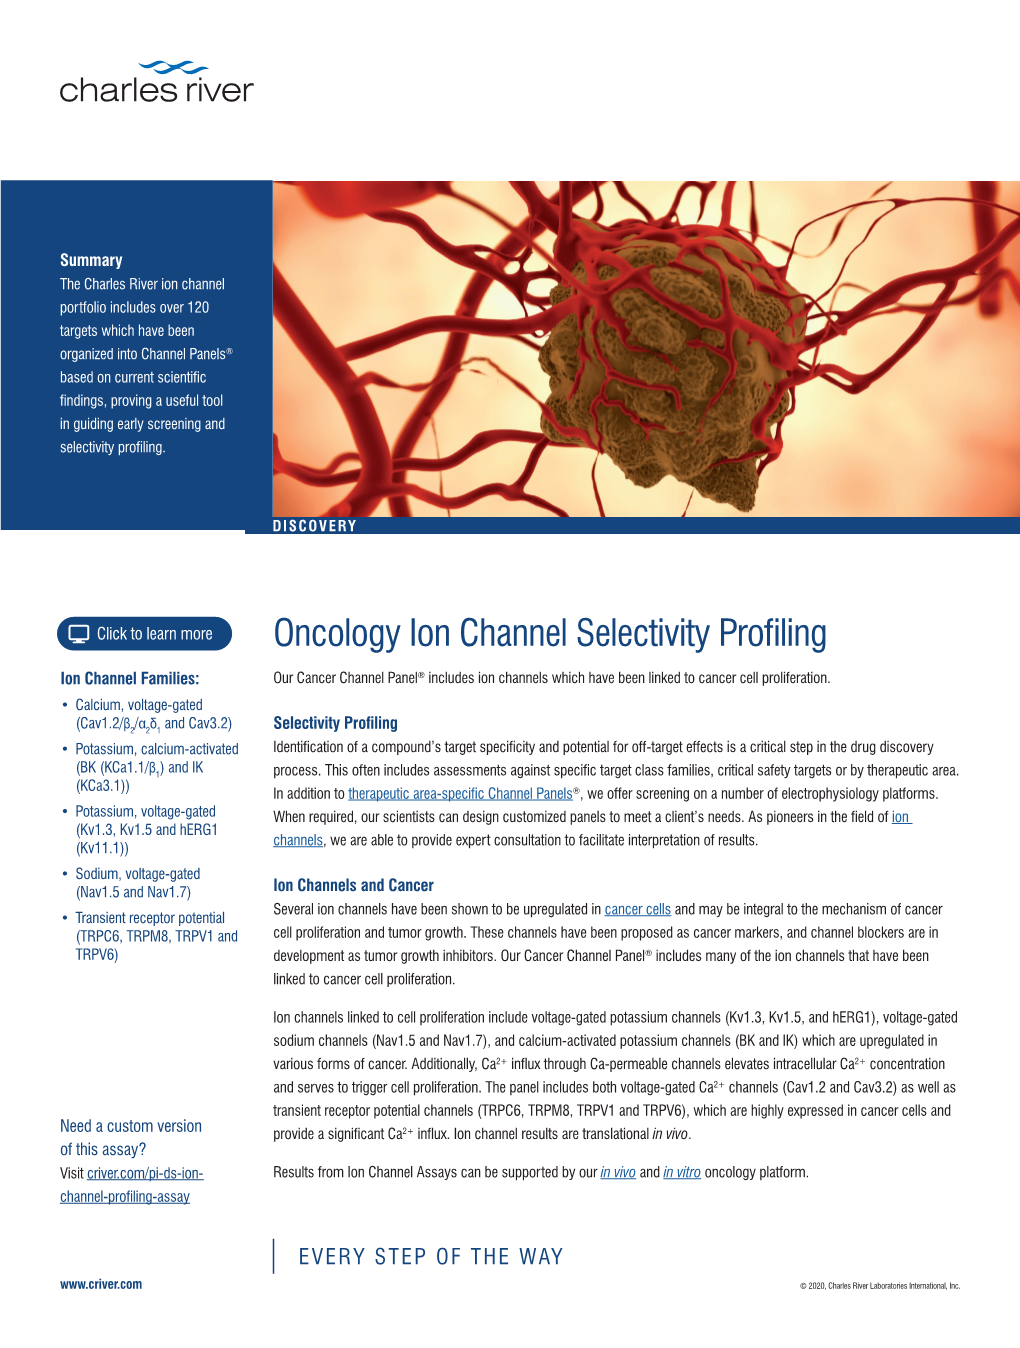 Ion Channel Selectivity Profiling: Oncology | Charles River